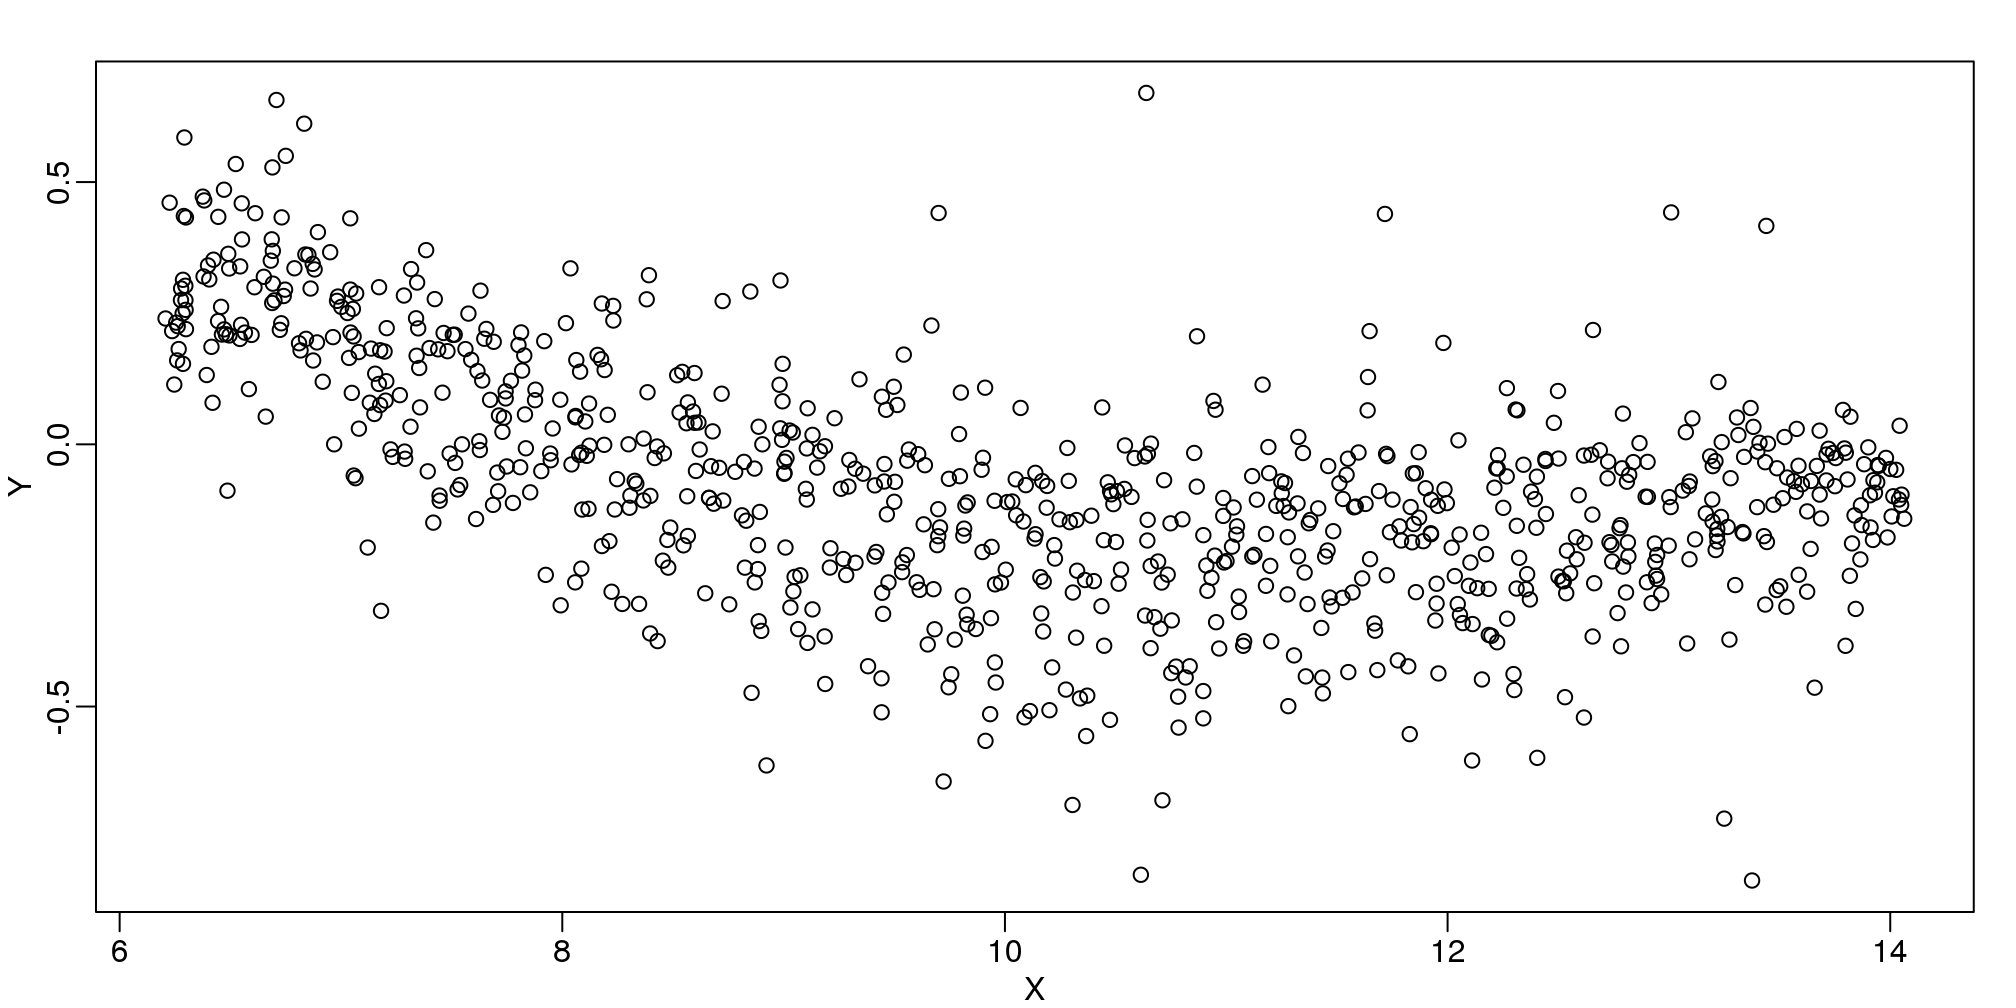 MA-plot comparing gene expression from two arrays.